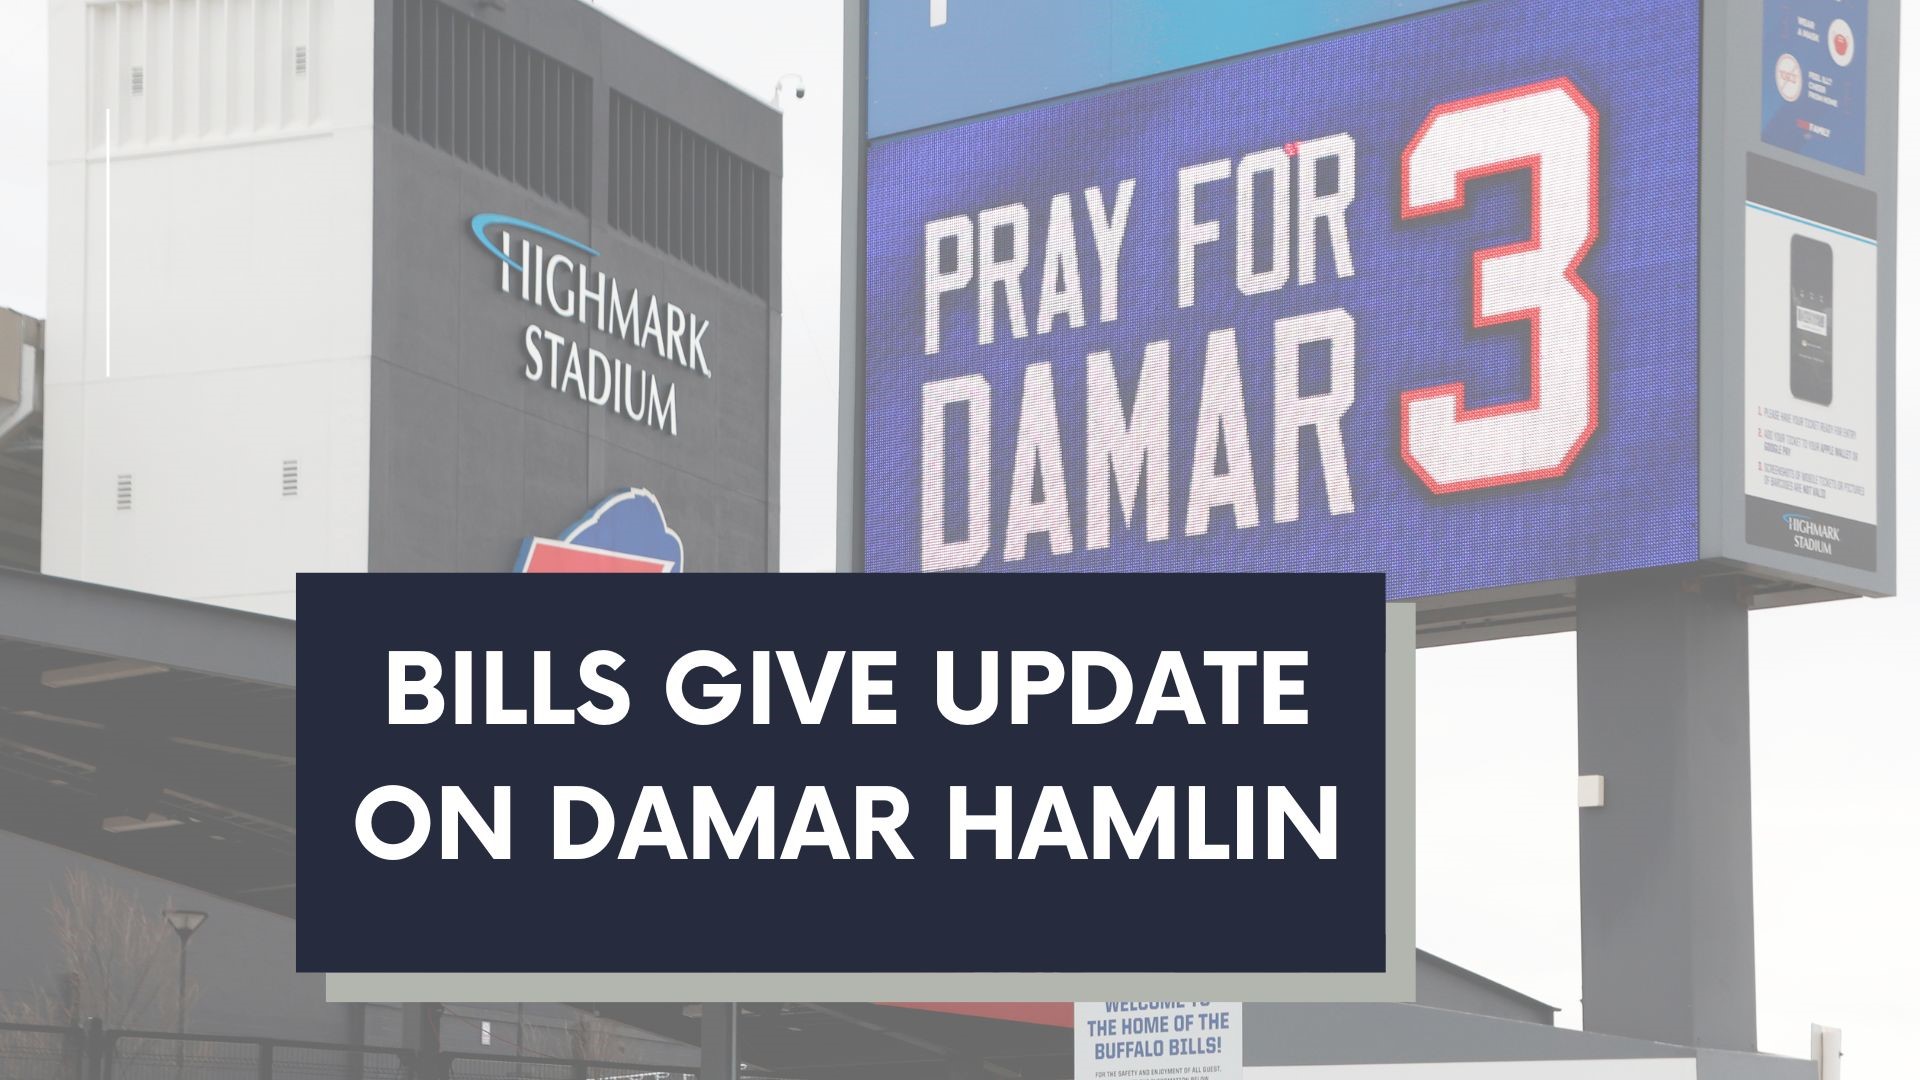 Bills GM and coach take questions on Damar Hamlin's recovery as the team prepares for Sunday's game.